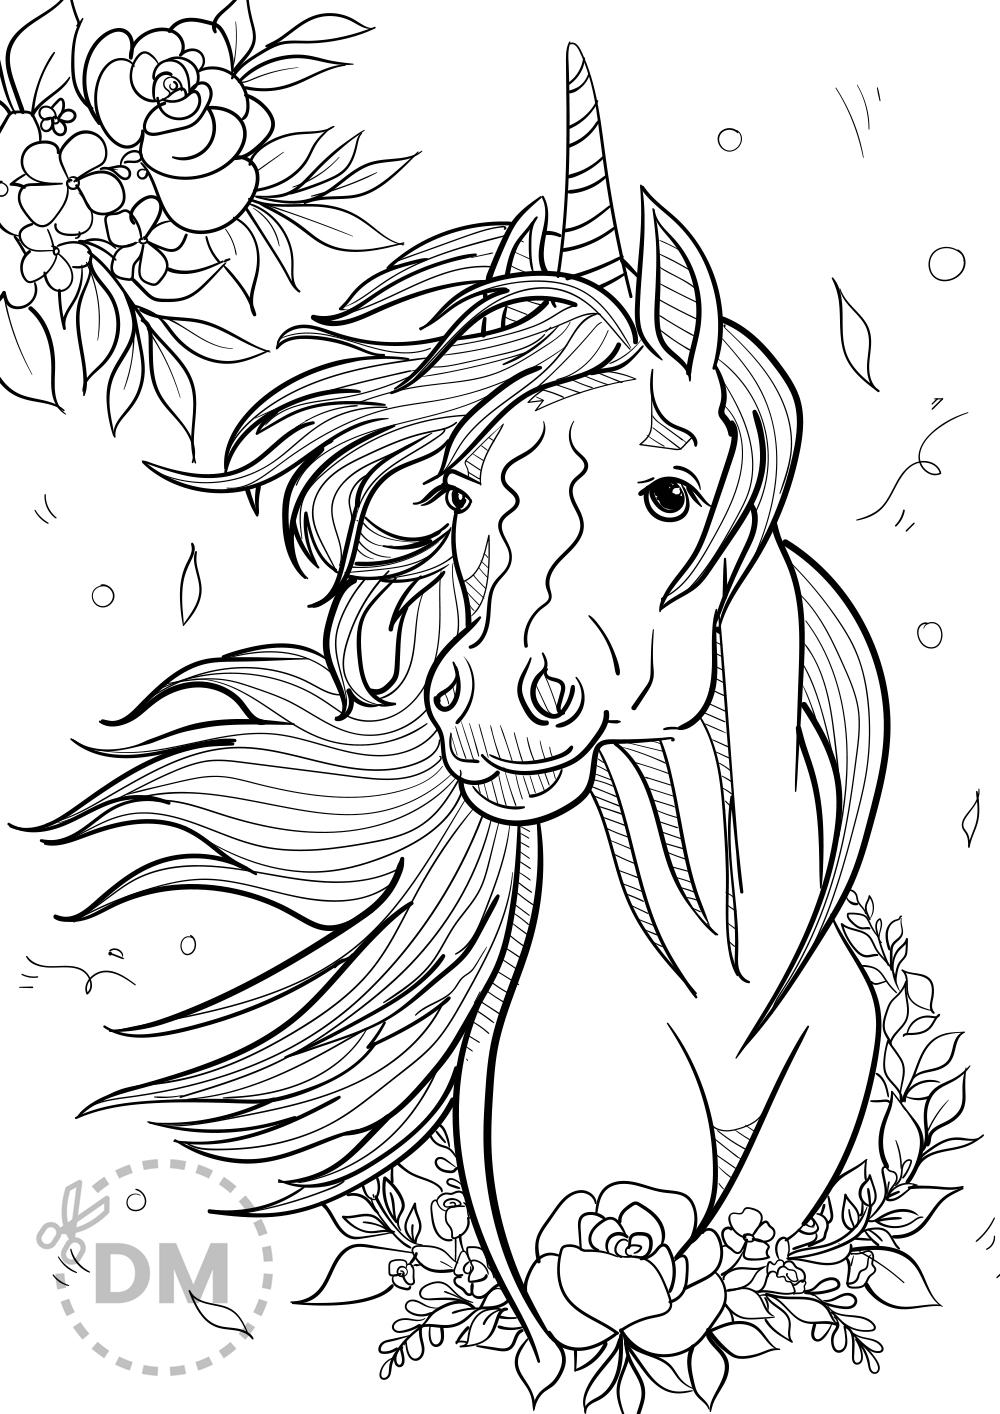 Unicorn face coloring page for teens and adults